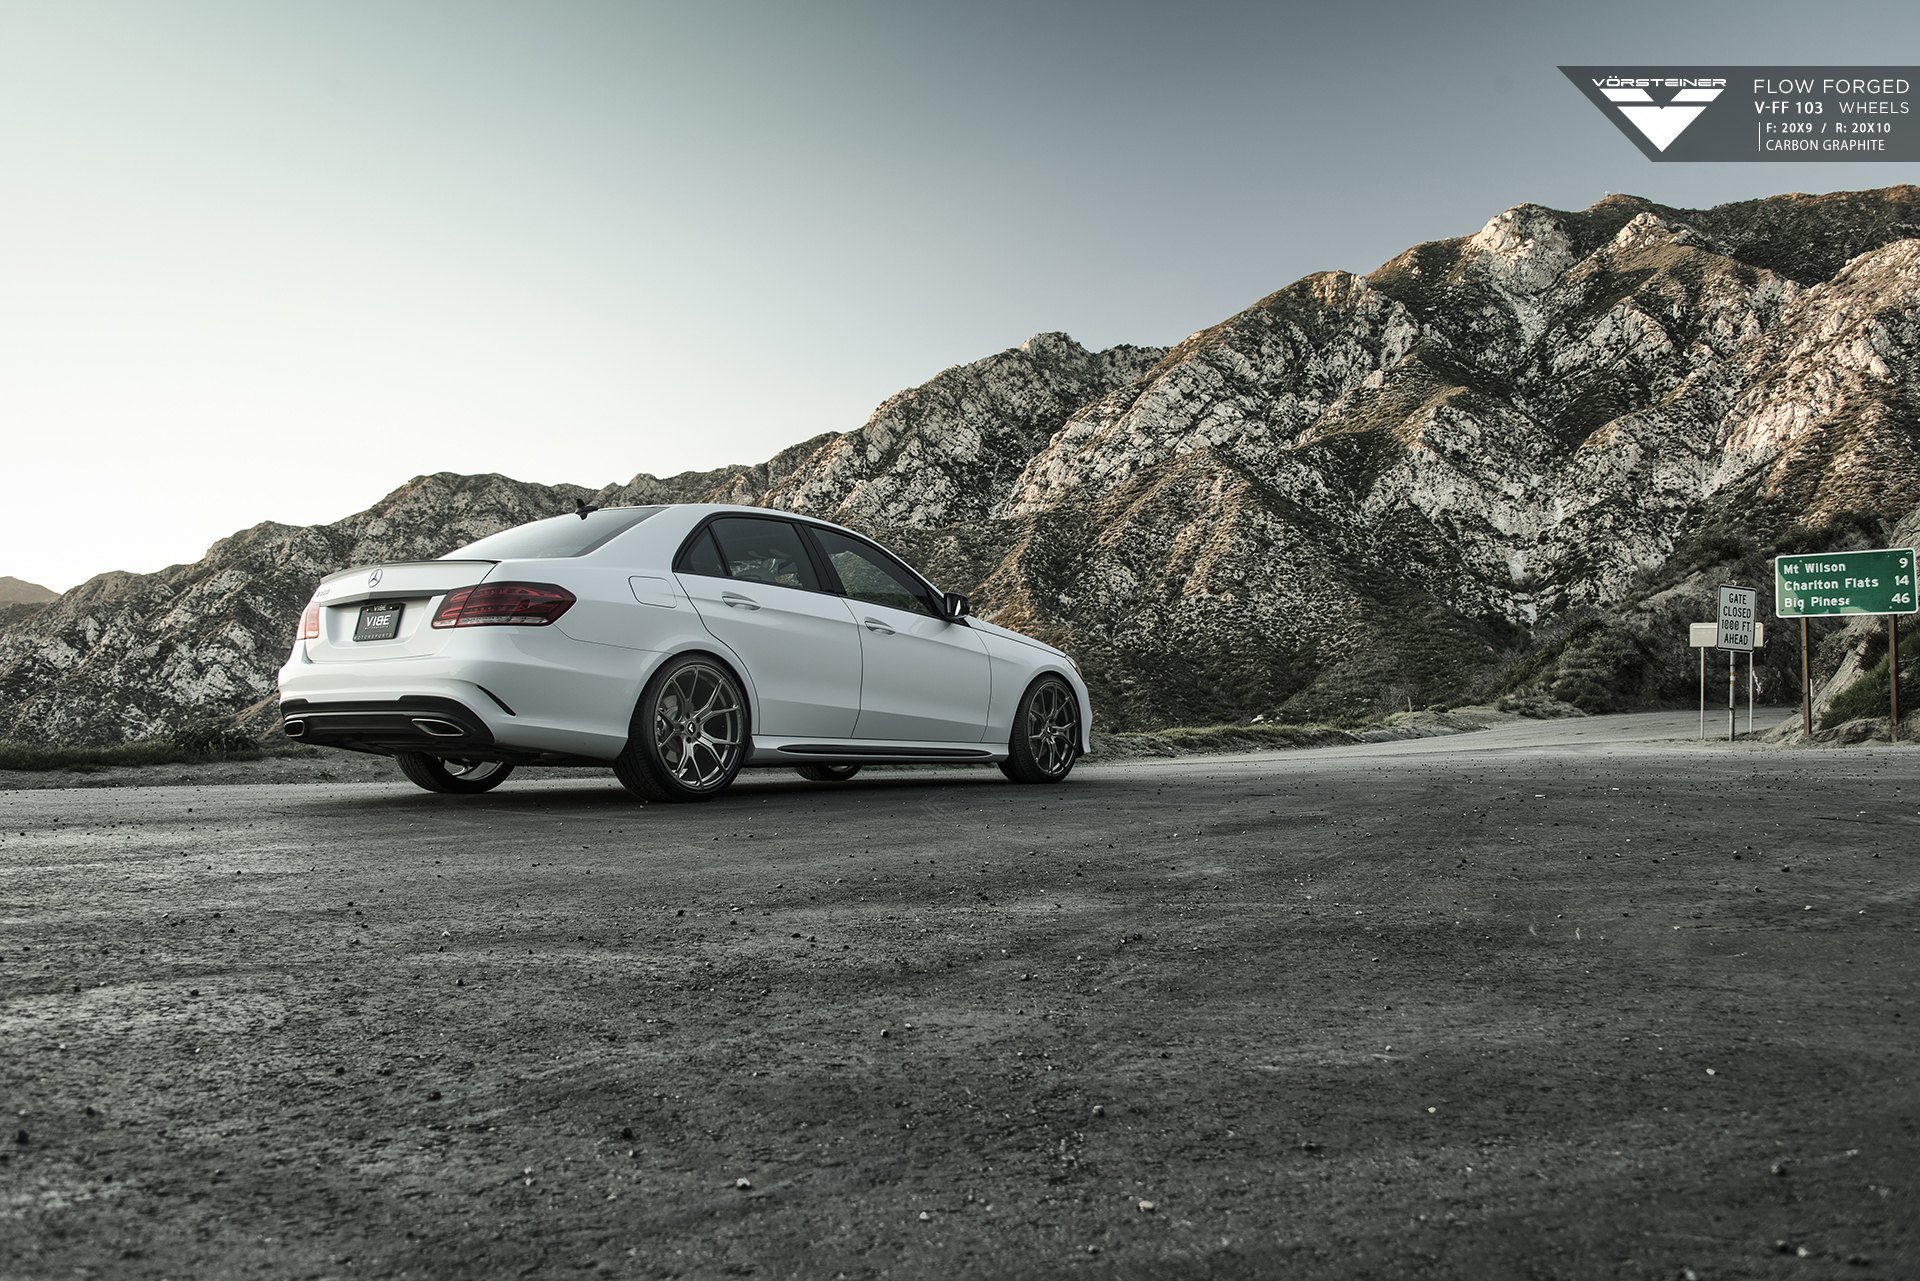 White Mercedes E Class with Aftermarket Rear Diffuser - Photo by Vorstiner